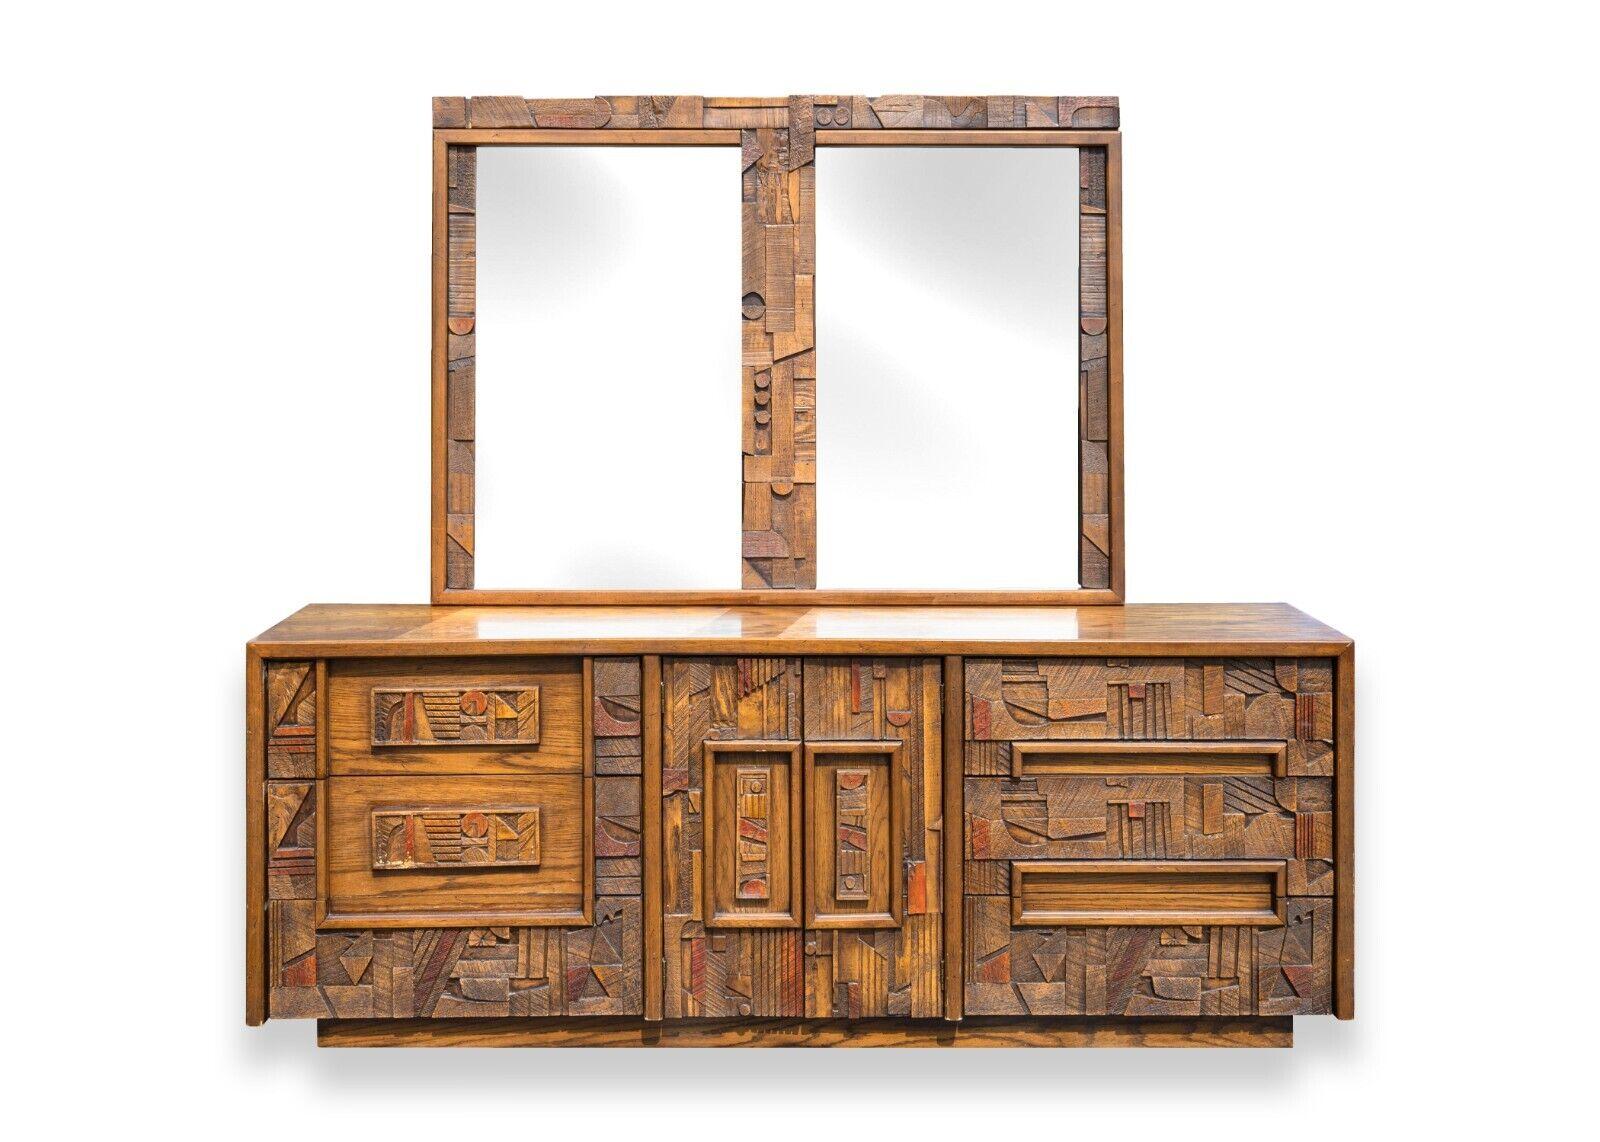 A brutalist 2pc bedroom set by Lane Pueblo Collection. This magnificent bedroom set from Lane furniture's Pueblo Collection. This multi-piece set includes a tall dresser cabinet, a long dresser credenza, and a large mirror that attaches to the long